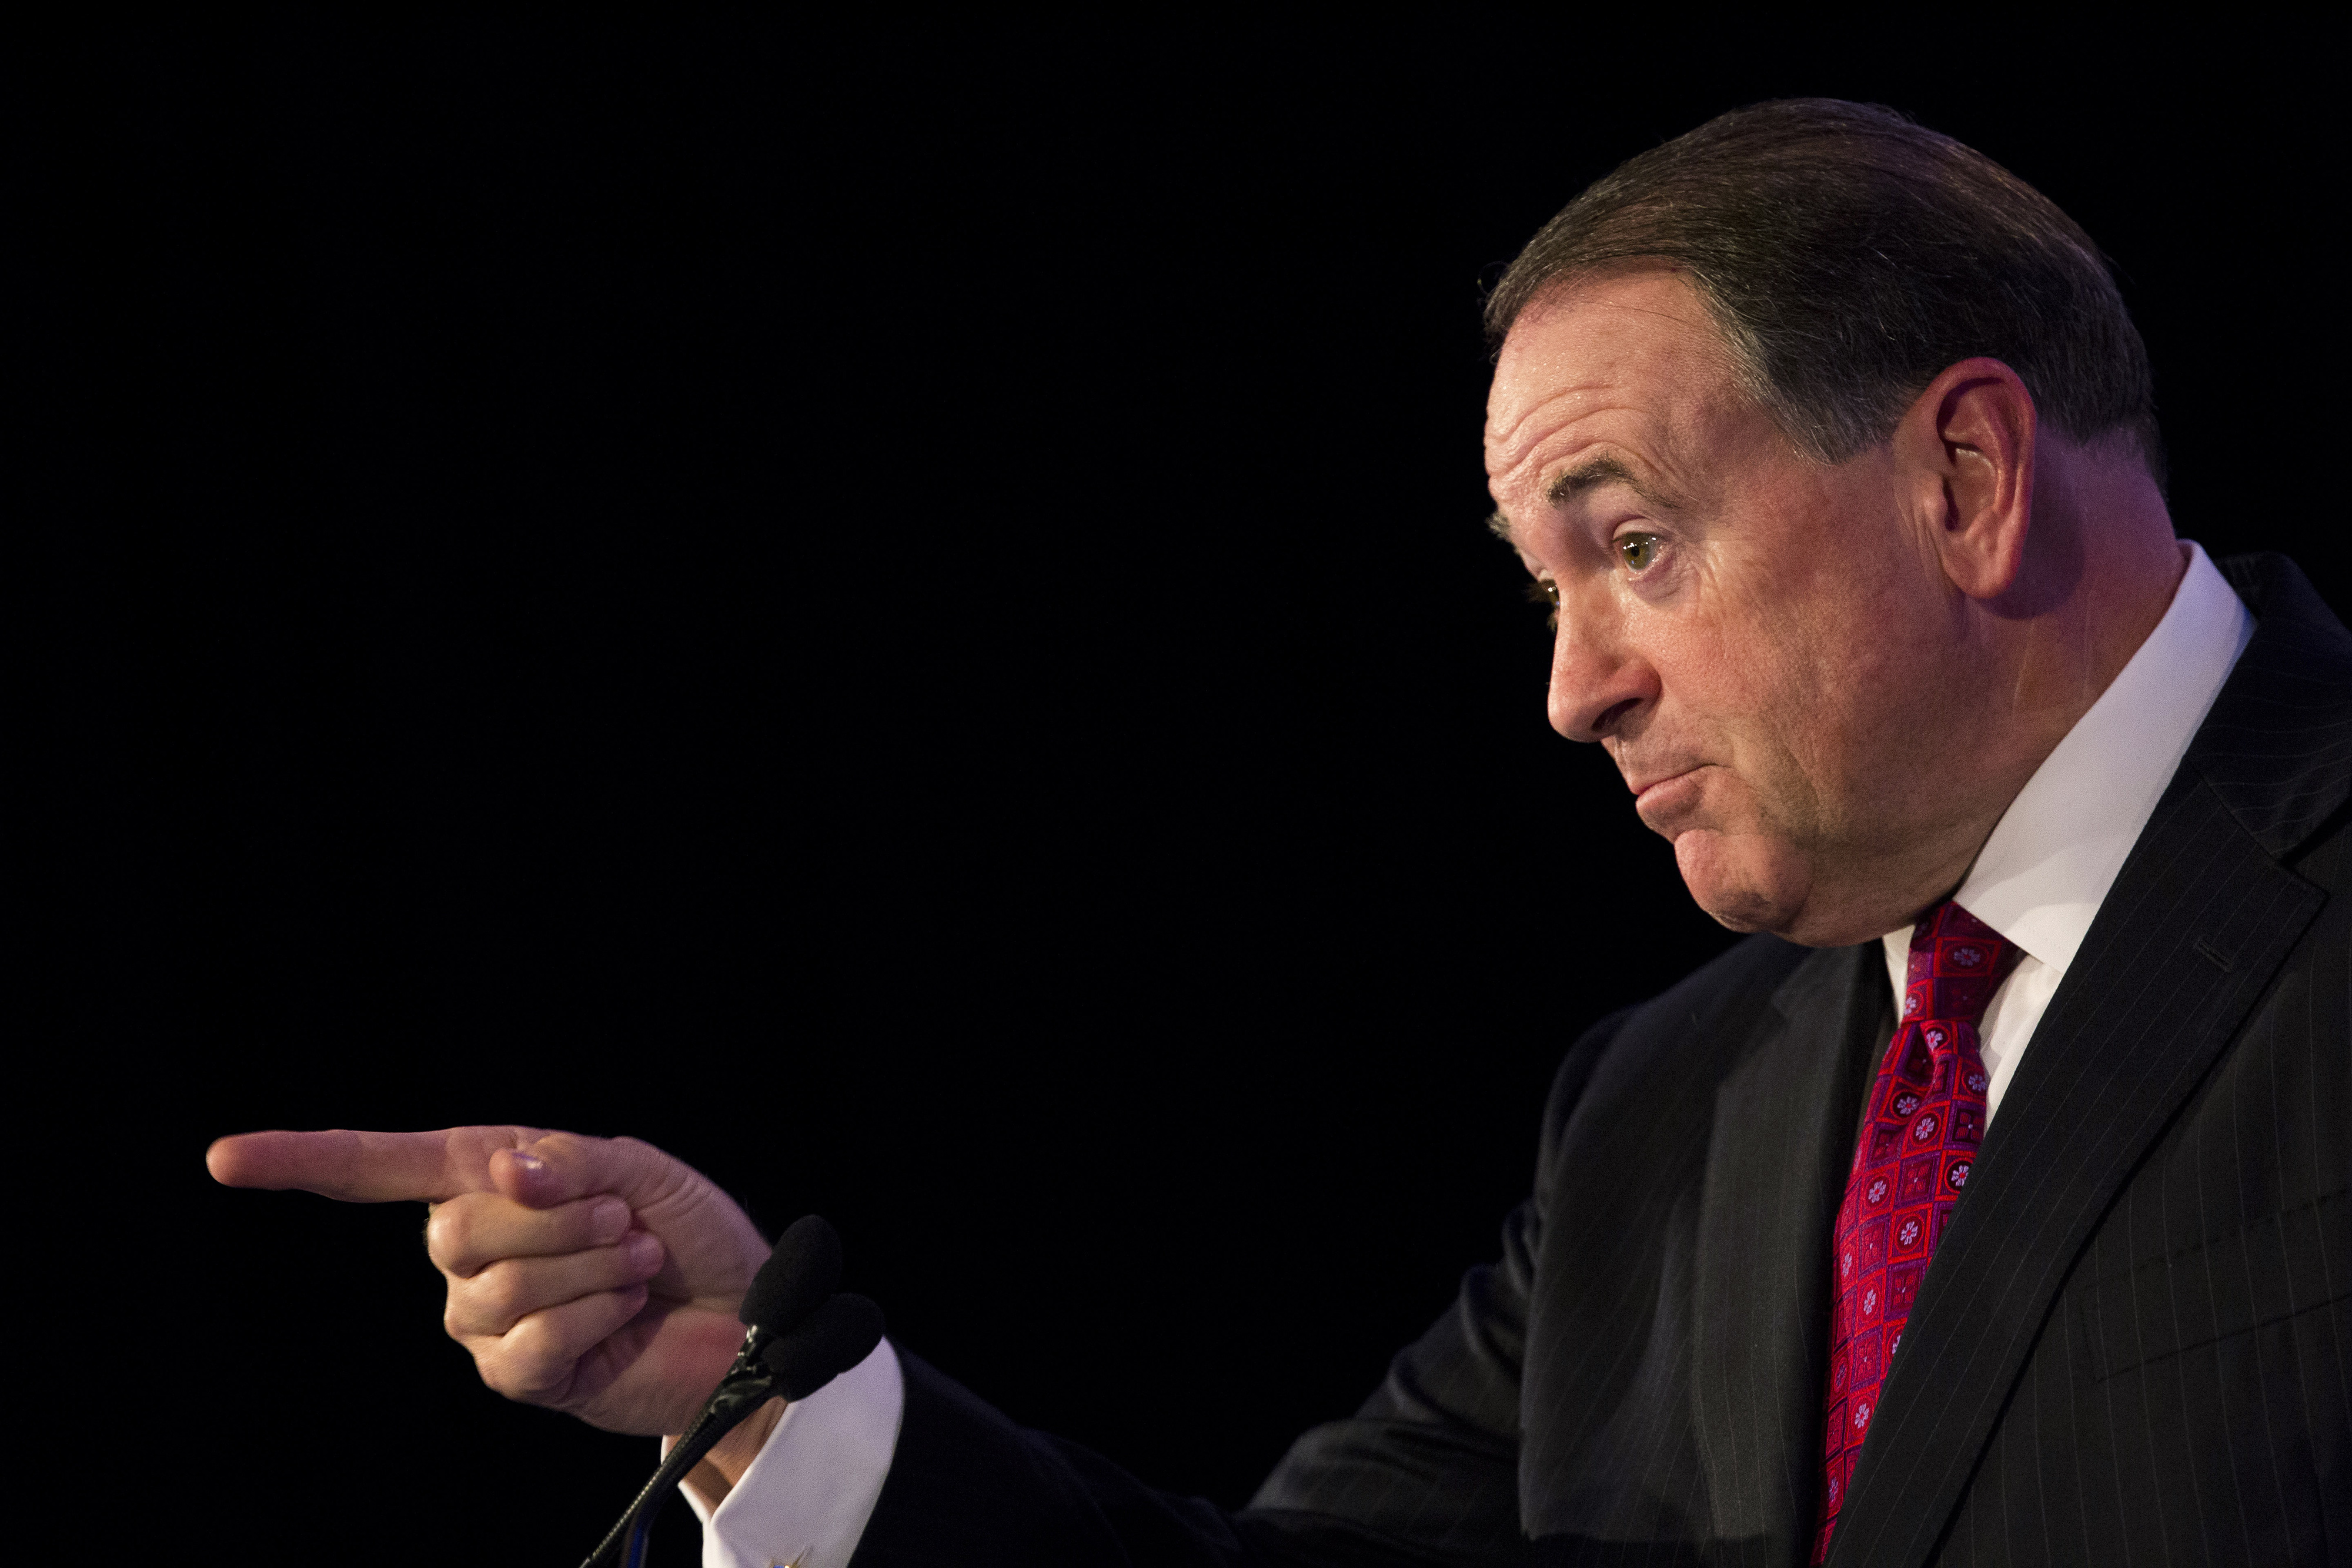 Mike Huckabee, former governor of Arkansas and 2016 Republican presidential candidate, speaks during the Values Voter Summit in Washington, D.C., U.S., on Sept. 25, 2015. (Drew Angerer—Bloomberg/Getty Images)